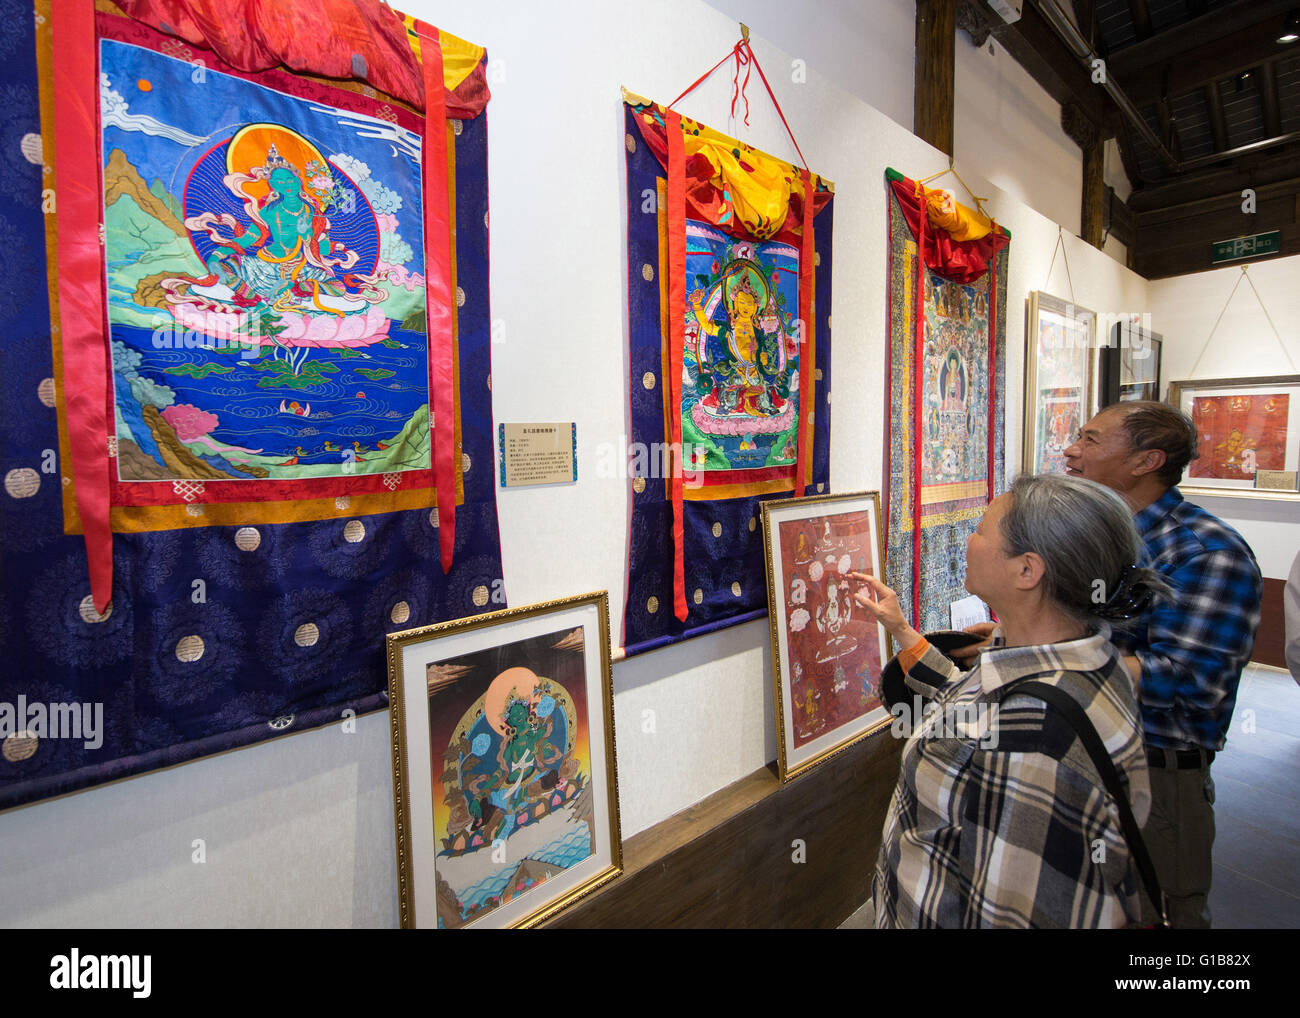 Nanjing, Nanjing, CHN. 12th May, 2016. Nanjing, China - May 12 2016: (EDITORIAL USE ONLY. CHINA OUT ) Thangka Exhibition from Gongka County Mozhu Yibet in Nanjing's Yu Garden. A thangka, variously spelt as tangka, thanka or tanka (Nepali pronunciation: [?t??a?ka]; Tibetan: ?????; Nepal Bhasa: ????) is a Tibetan Buddhist painting on cotton, or silk appliquÂ¨Â¦, usually depicting a Buddhist deity, scene, or mandala. Thangkas are traditionally kept unframed and rolled up when not on display, mounted on a textile backing somewhat in the style of Chinese scroll paintings, with a further silk cover Stock Photo